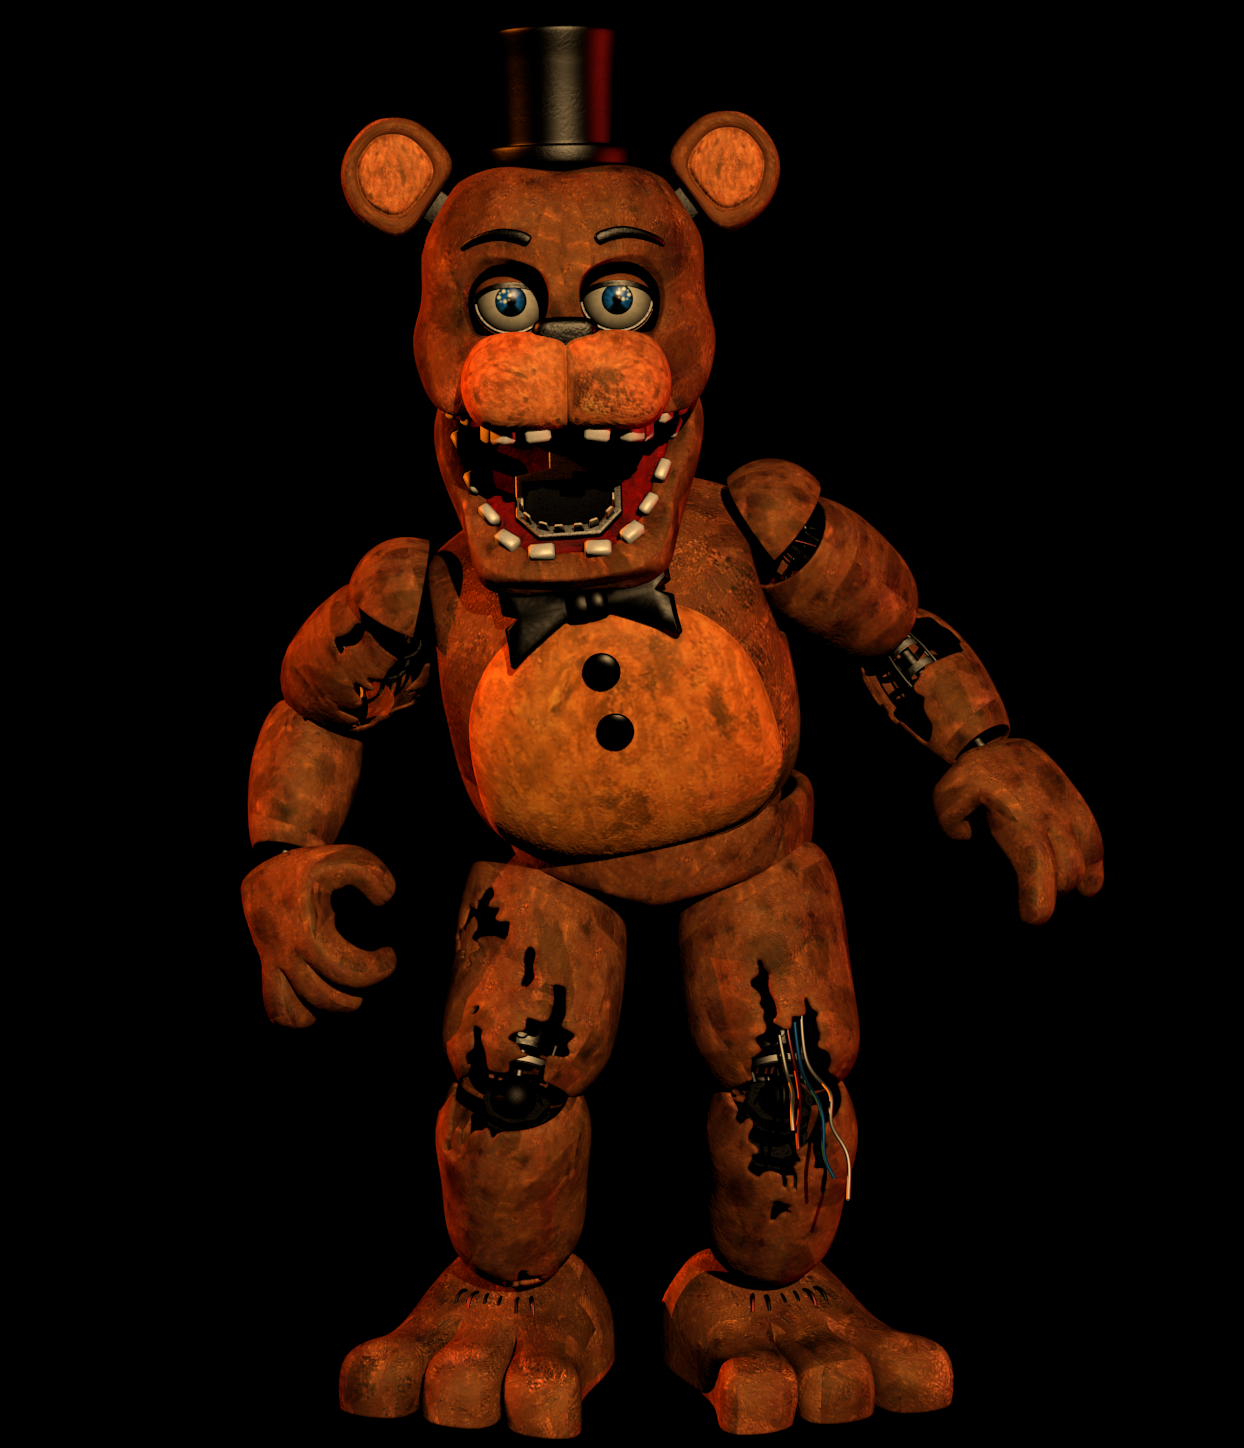 Extra Withered Freddy by mrflimflam257674676 on DeviantArt